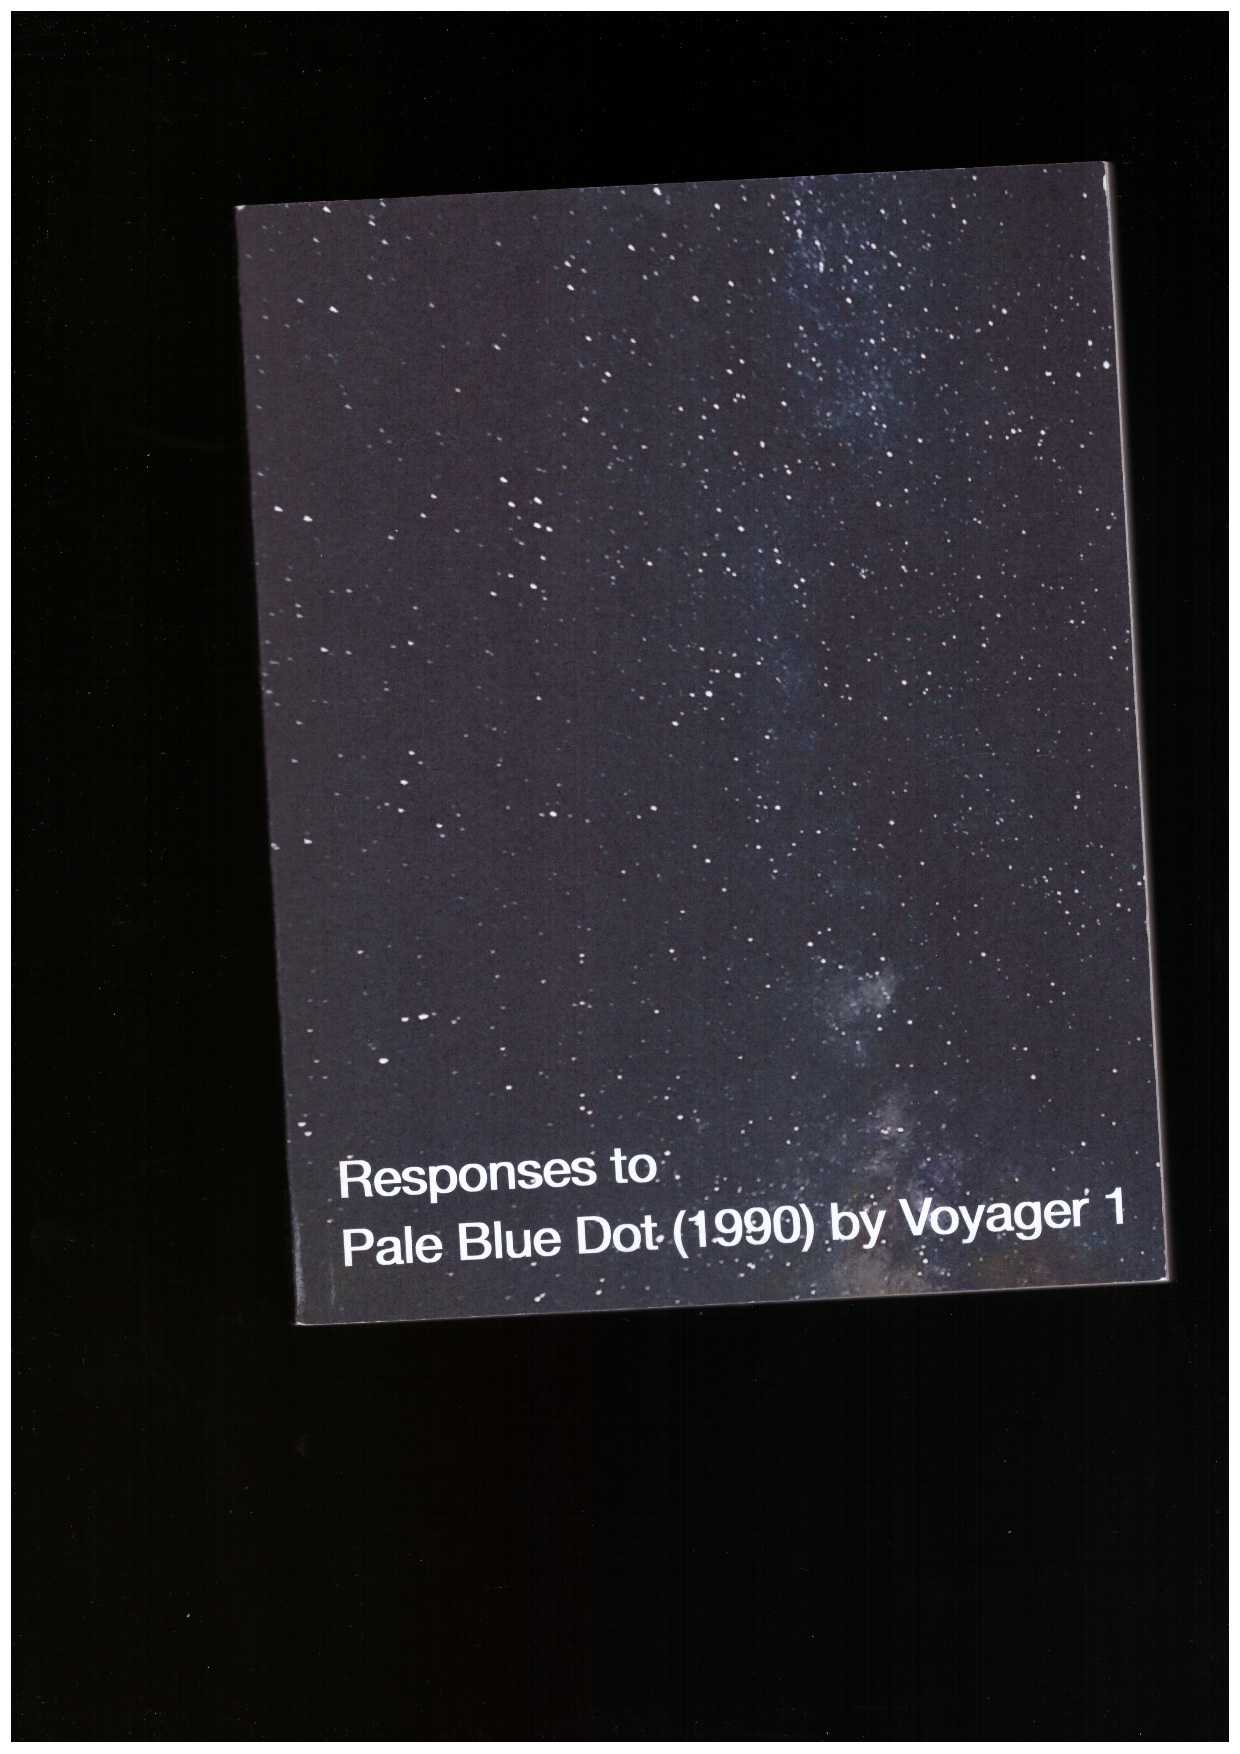 PORTER, Richard (ed.) - Responses to Pale Blue Dot (1990) by Voyager 1